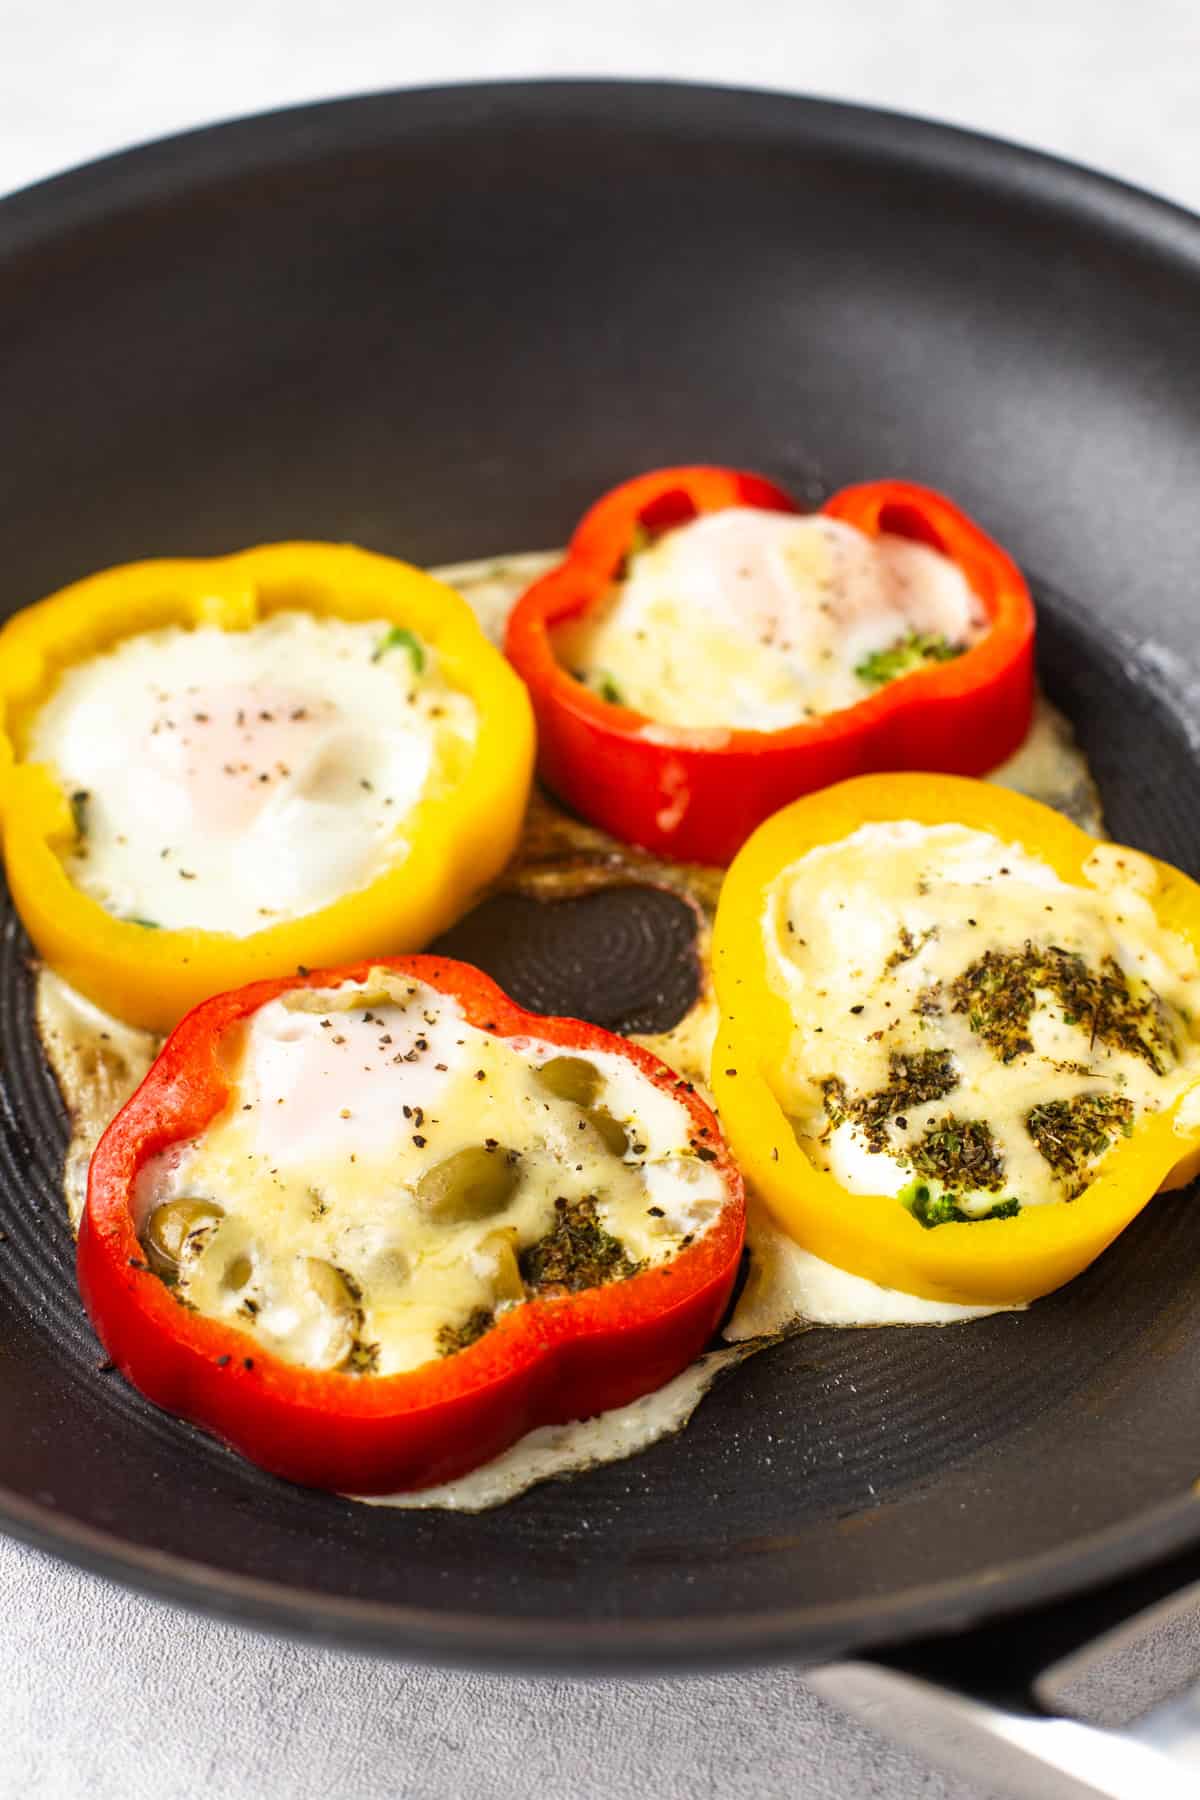 Rings of pepper in a frying pan with fried eggs inside.